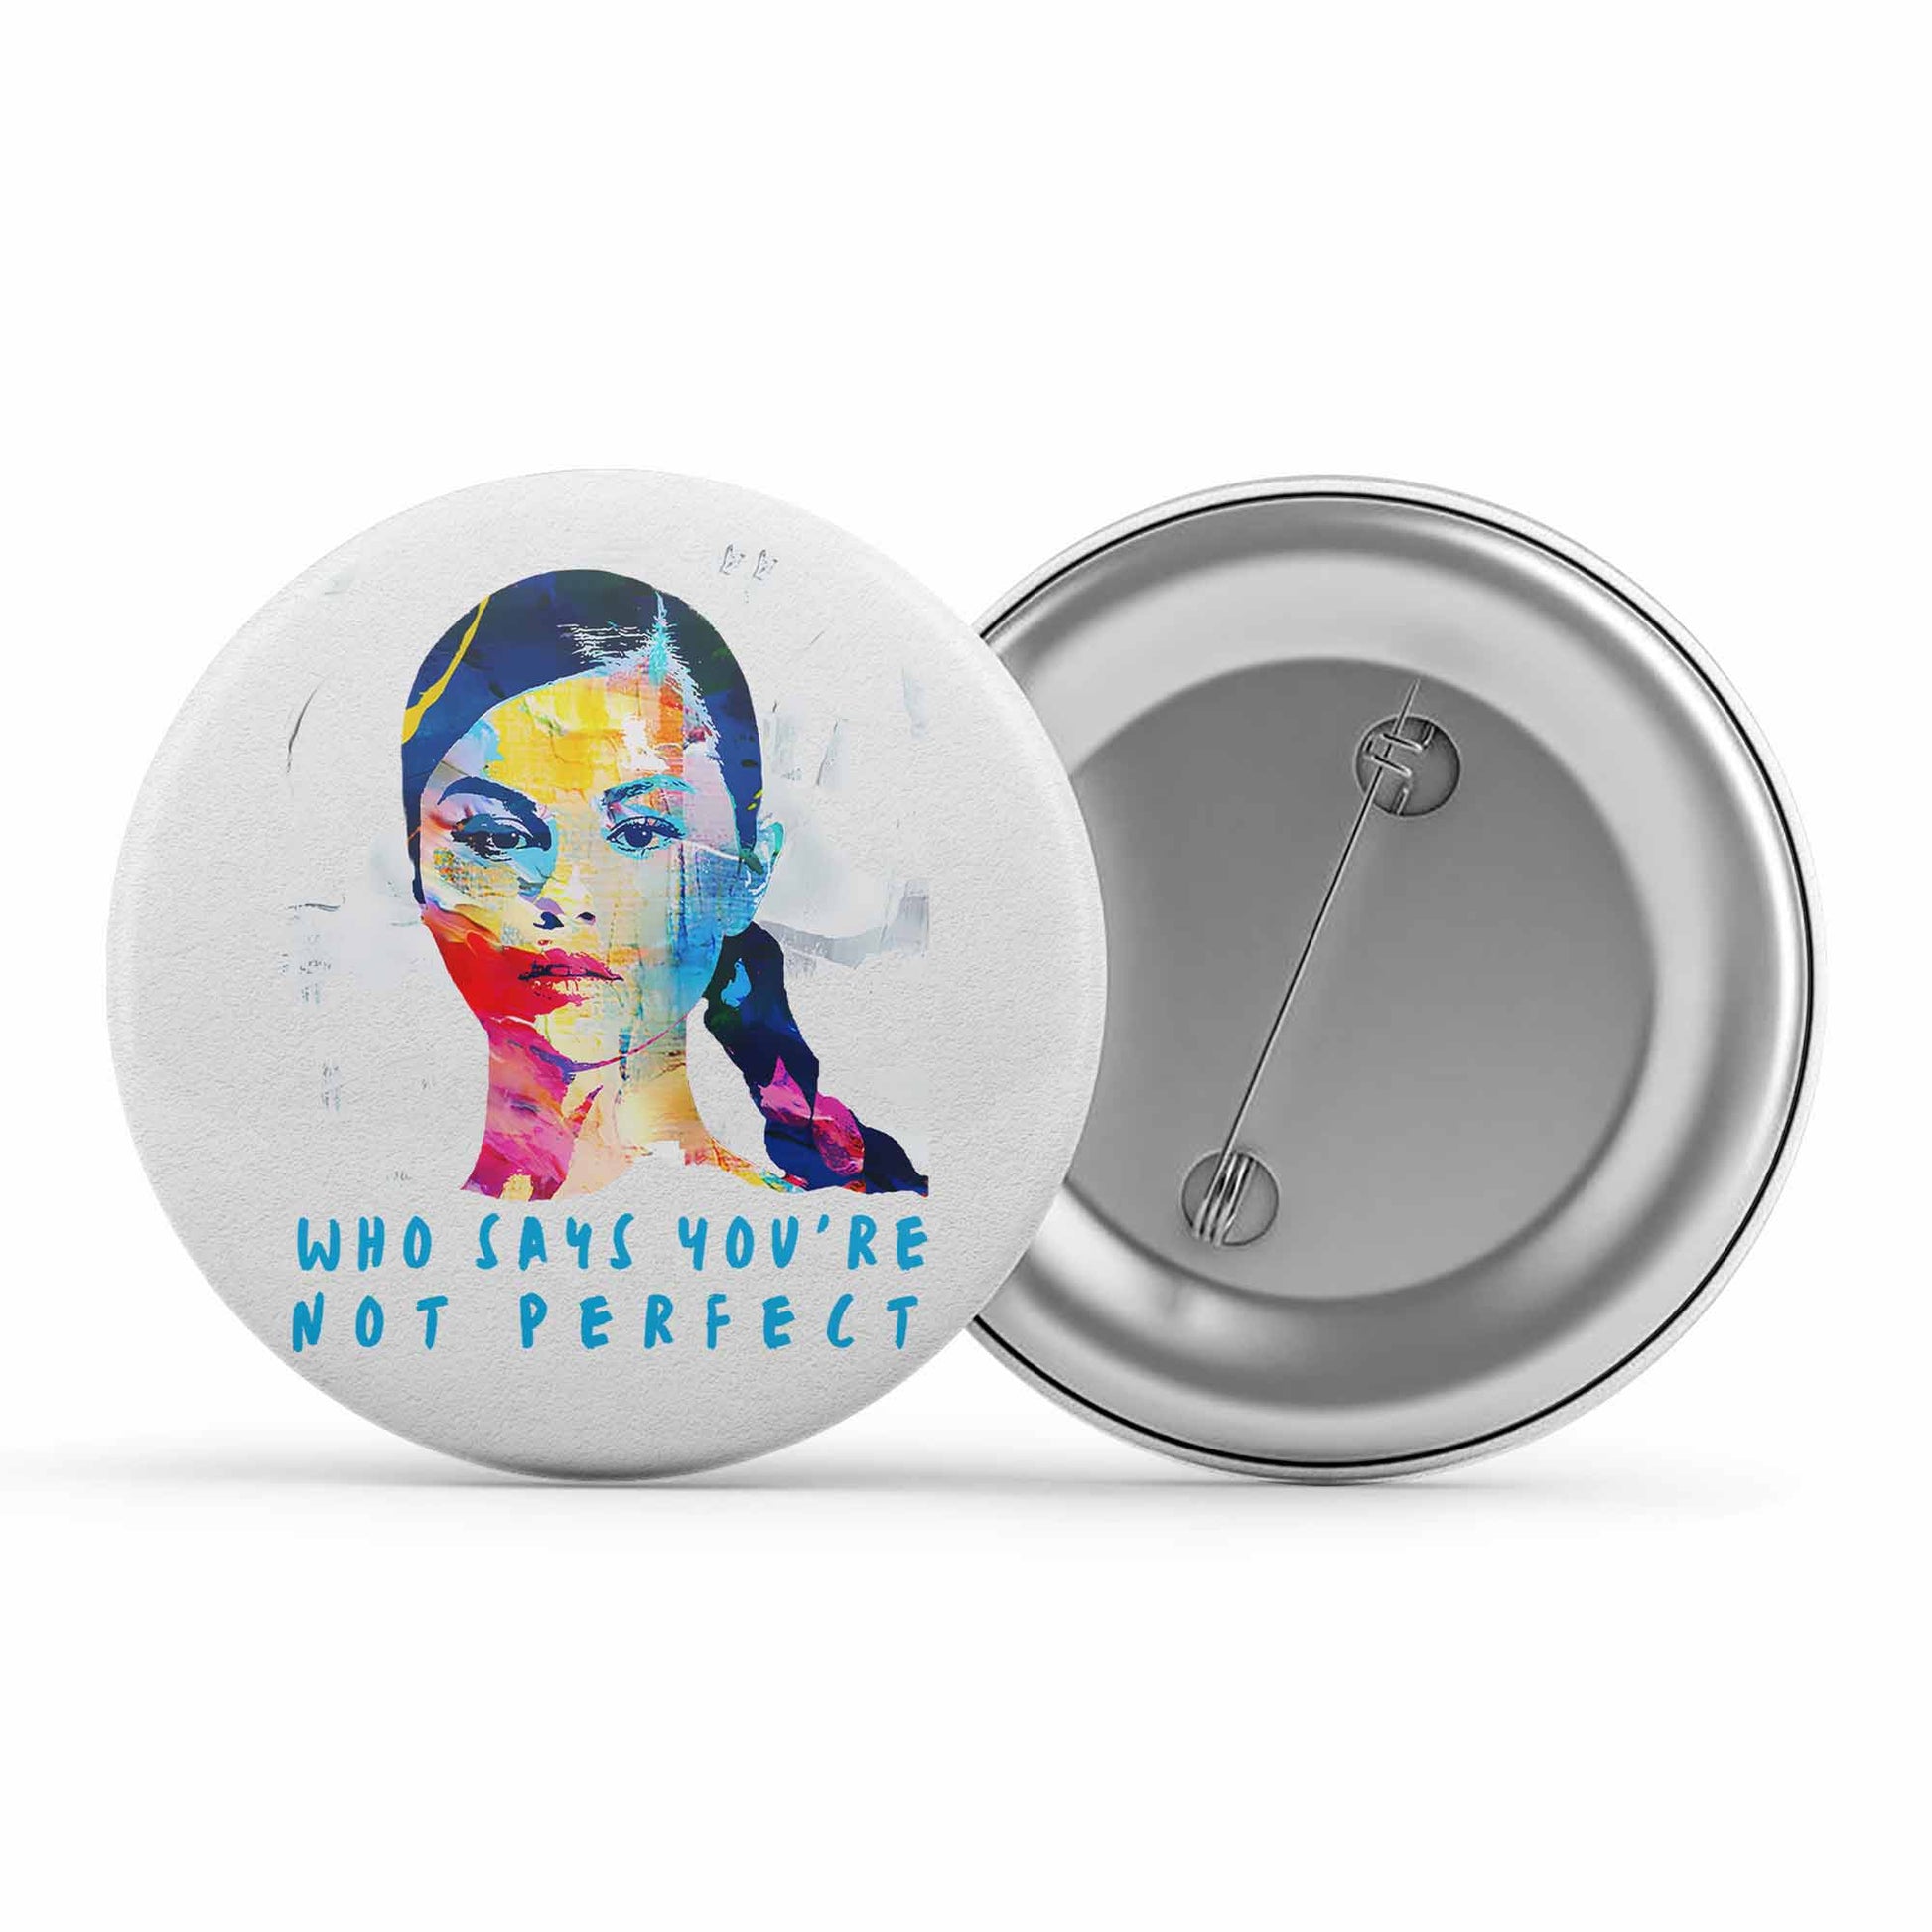 selena gomez who says you're not perfect badge pin button music band buy online india the banyan tee tbt men women girls boys unisex